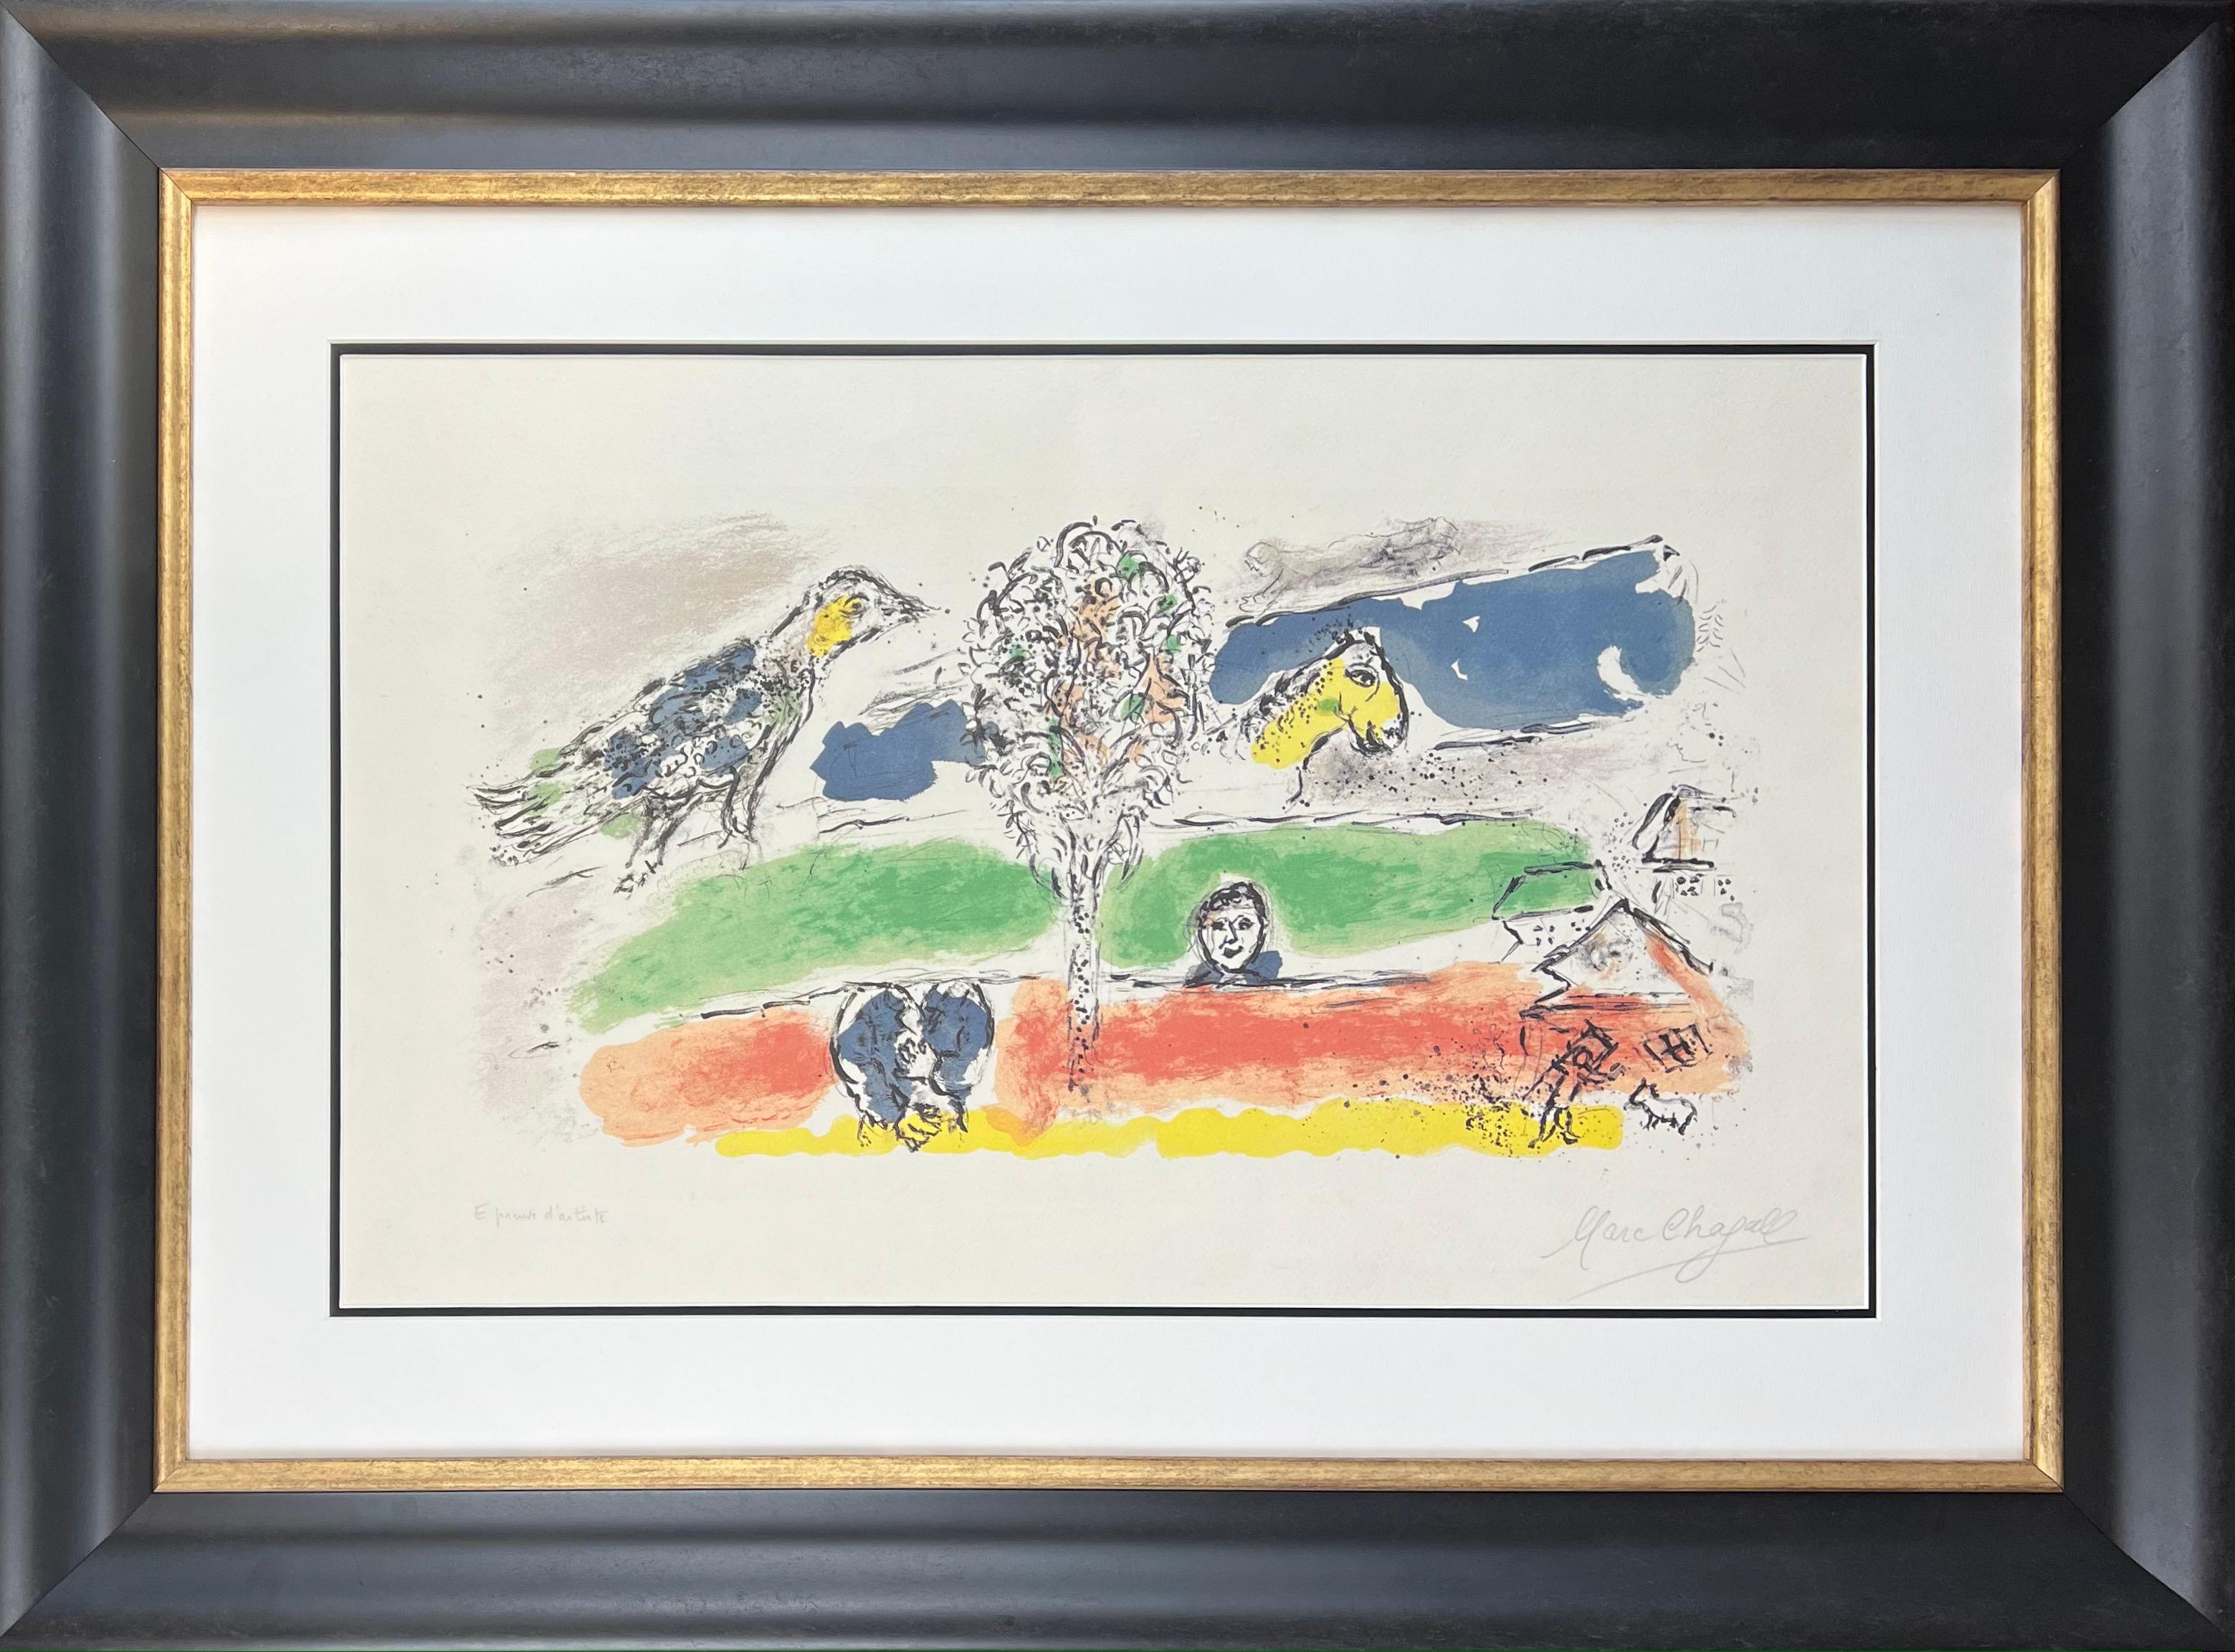 Color lithograph on Arches paper, edited in 1974
limited edition in 50 copies, plus some artist proofs
numbered as: Epreuve d’artiste ( artist proof )
signed in pencil by artist in lower right corner
paper size: 42 x 67 cm
illustration size: 28 x 55